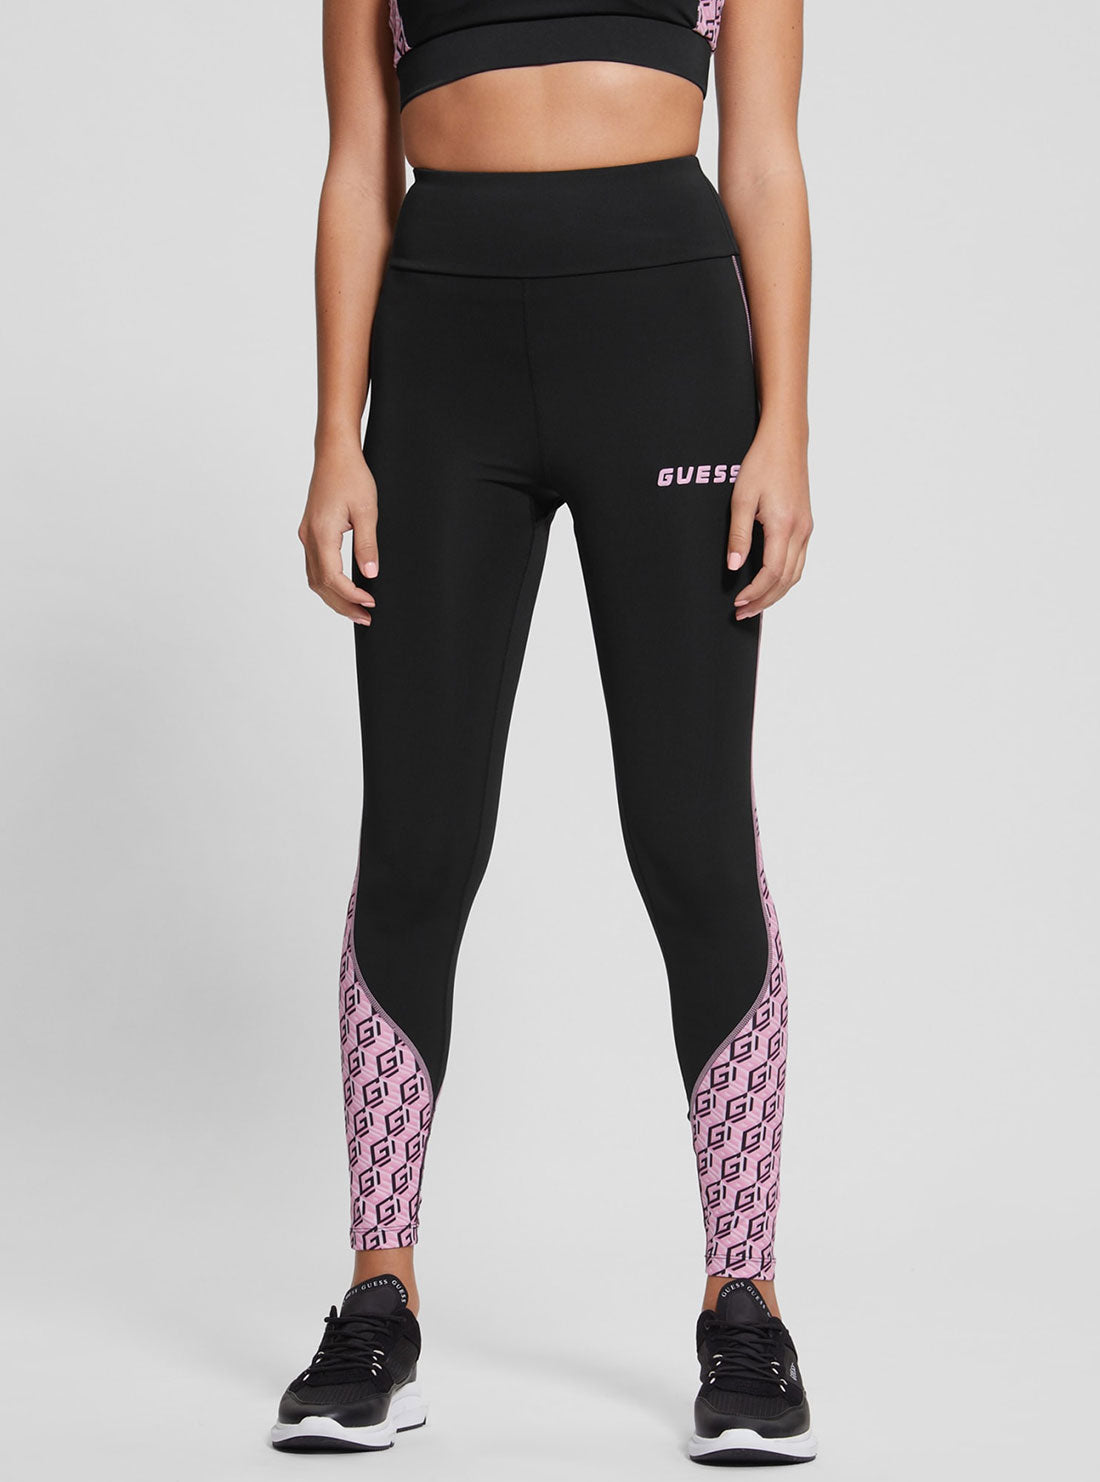 Does anyone know what brand these women's leggings are? No tags or text,  just this logo. : r/HelpMeFind